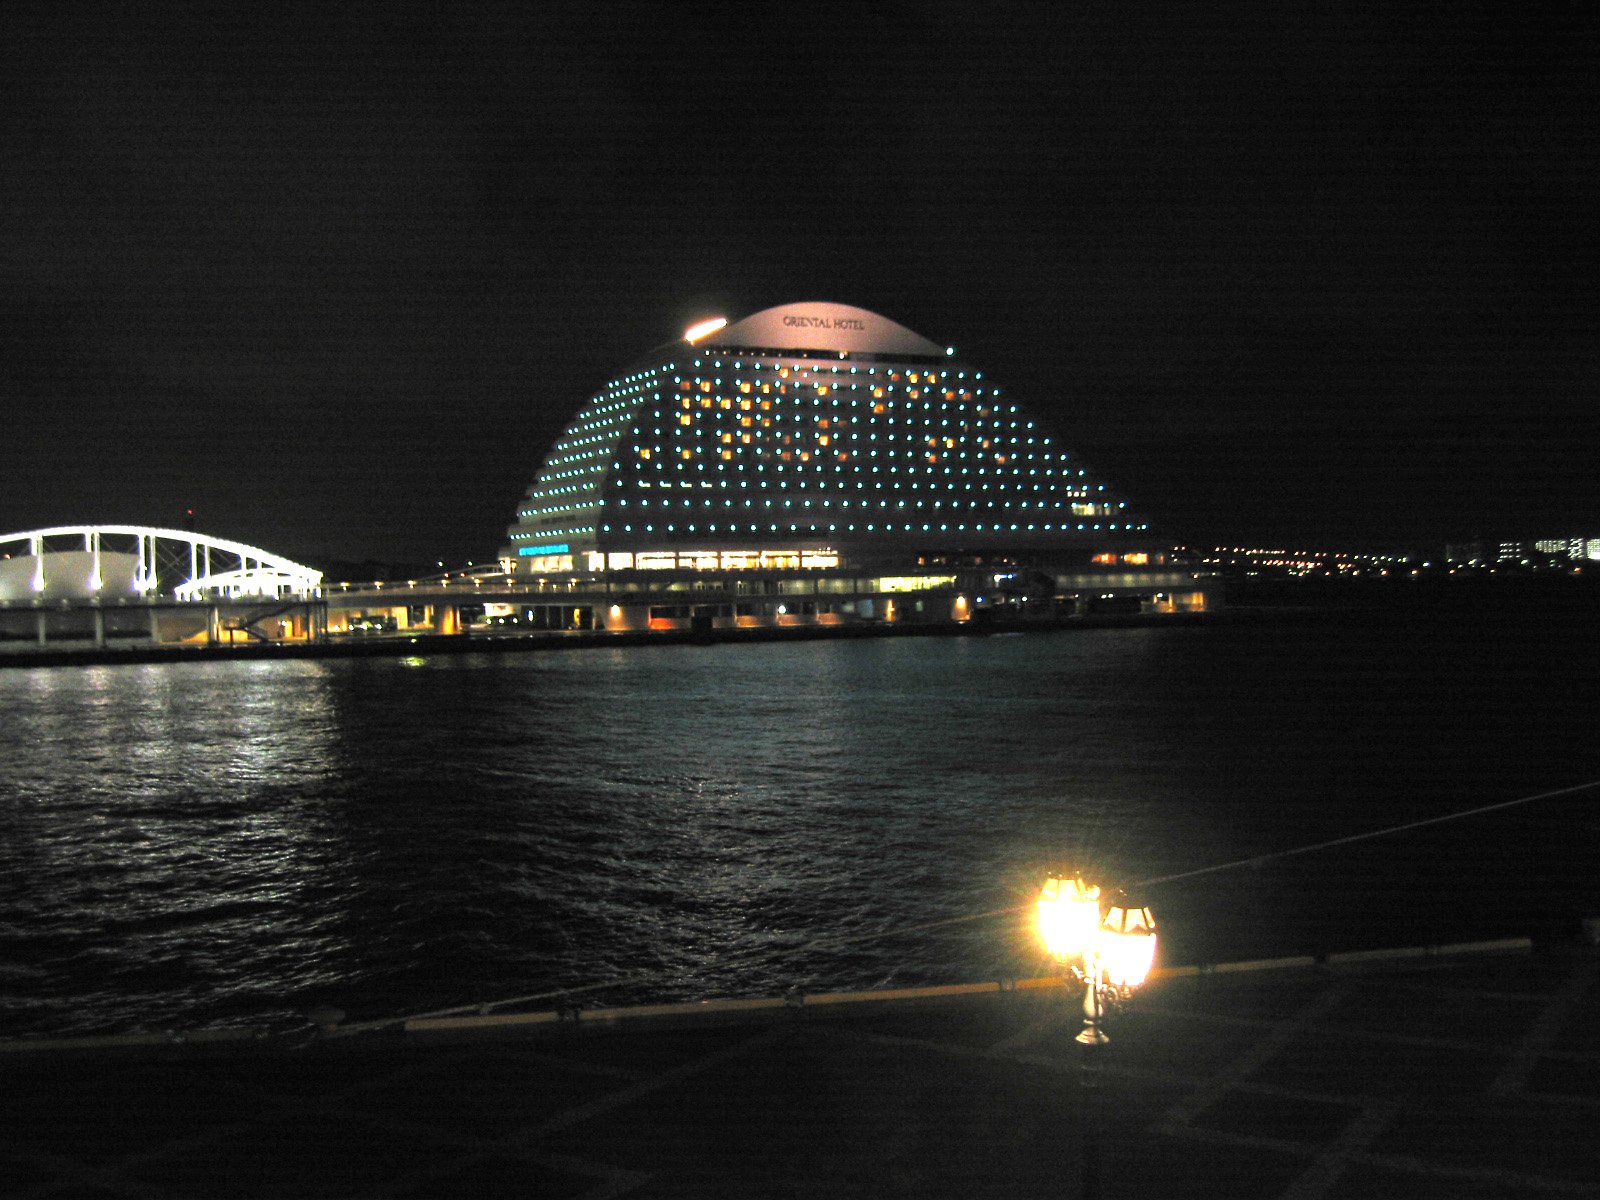 an artistic image of a large building by the water